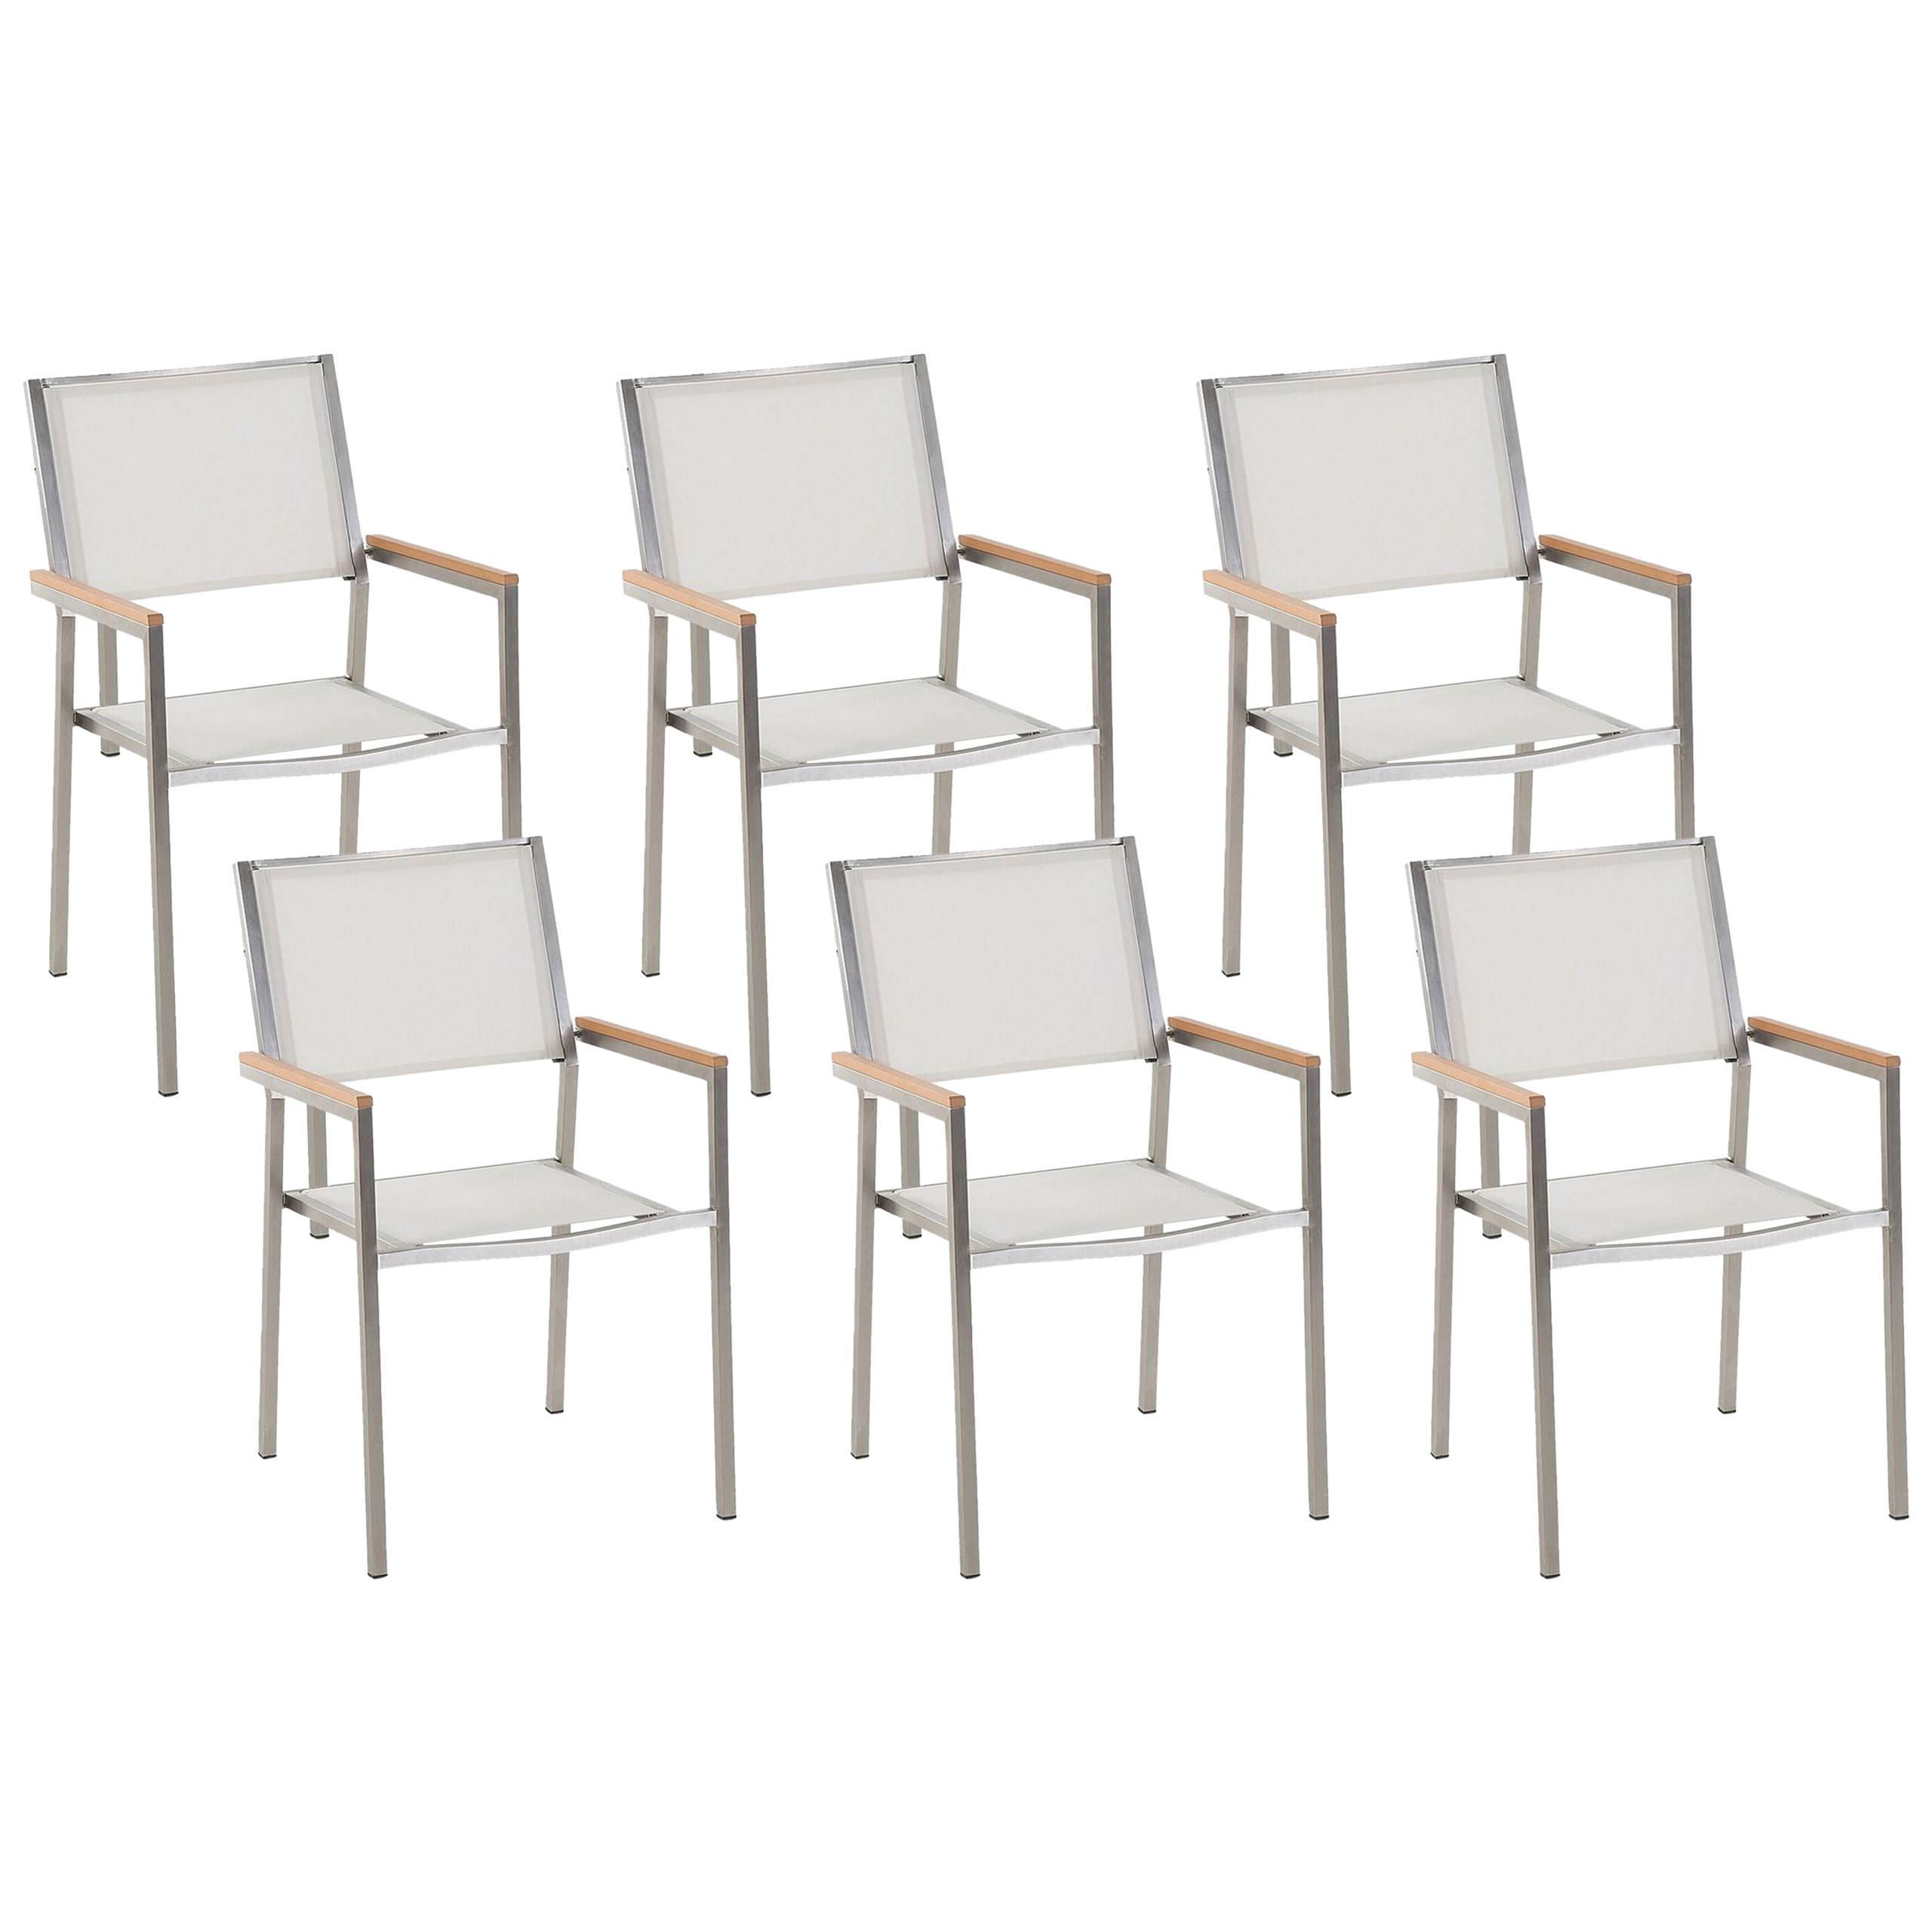 Beliani Set of 6 Garden Dining Chairs White and Silver Textile Seat Stainless Steel Legs Stackable Outdoor Resistances